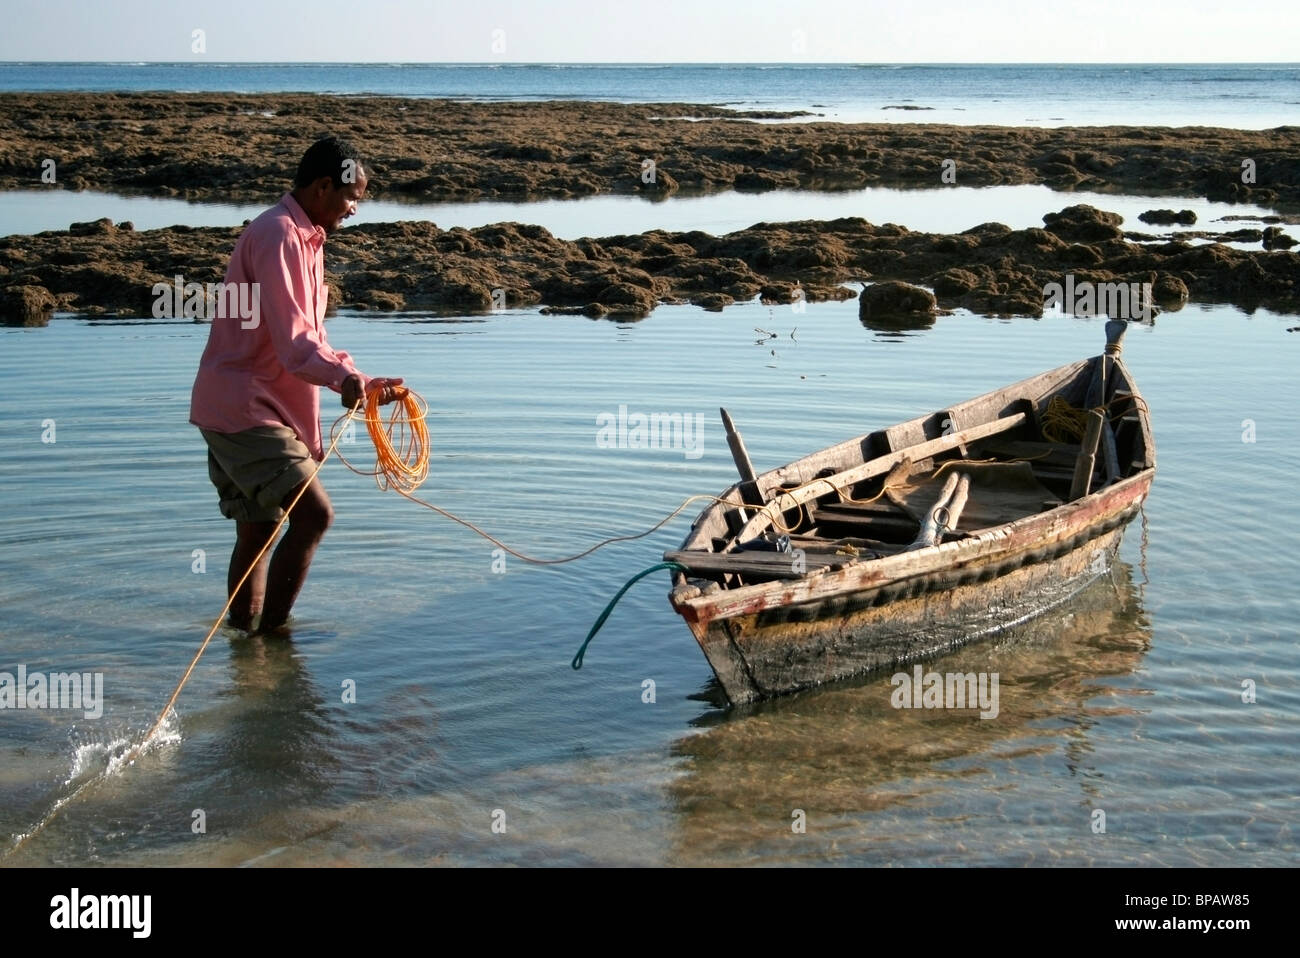 Fisherman and his Boat. Fisherman preparing his boat before heading out to sea. Taken at Neil Island, Andaman Islands, Jan 2008. Stock Photo